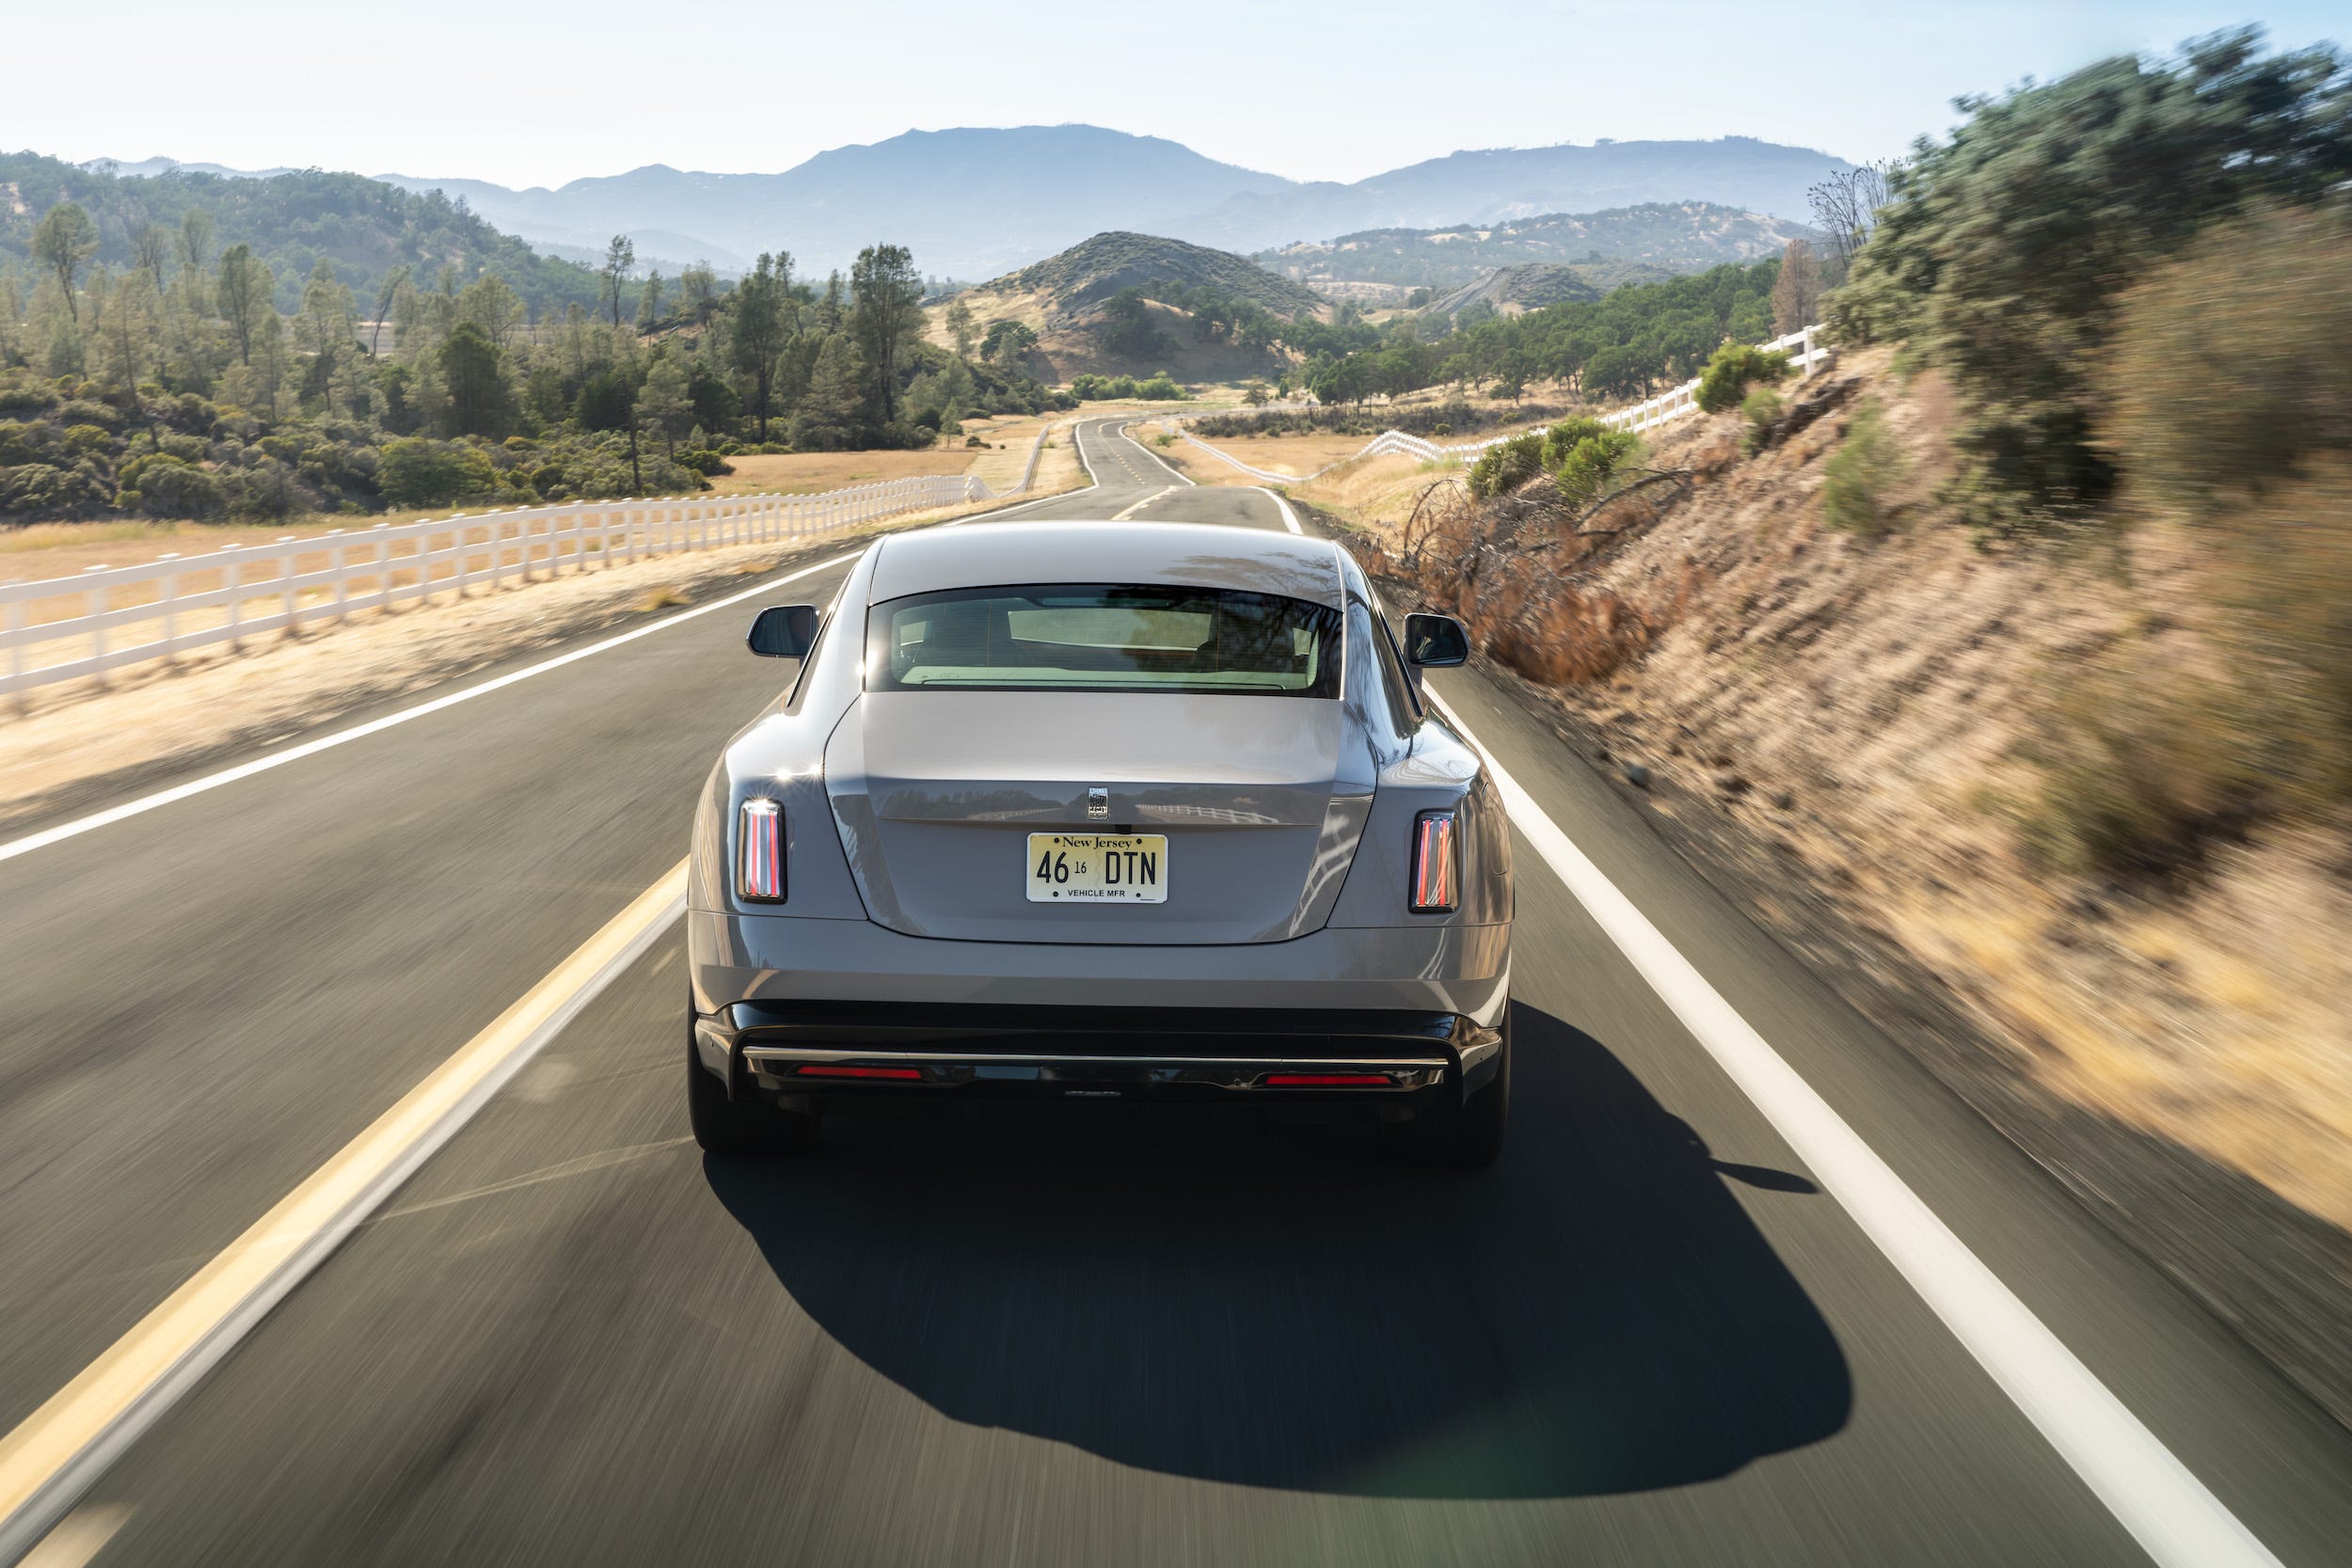 A gray Rolls-Royce Spectre electric car viewed from the rear, driving down a road with mountains in the distance.